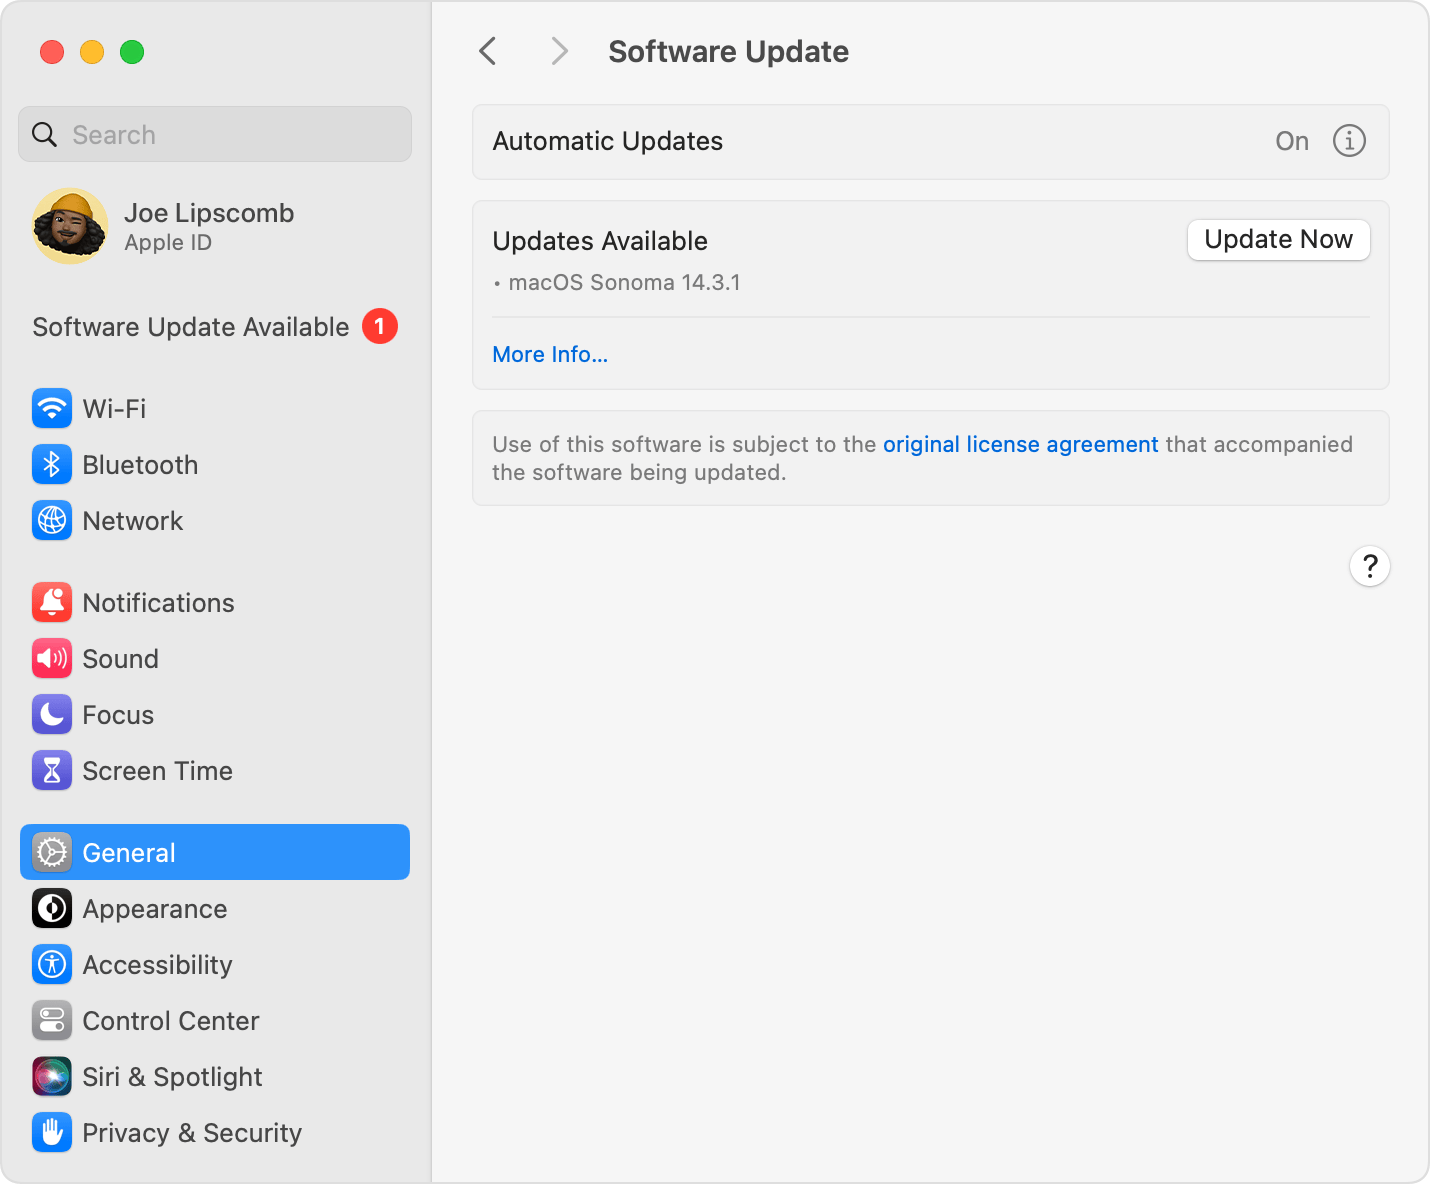 Example: Software Update in macOS Sonoma